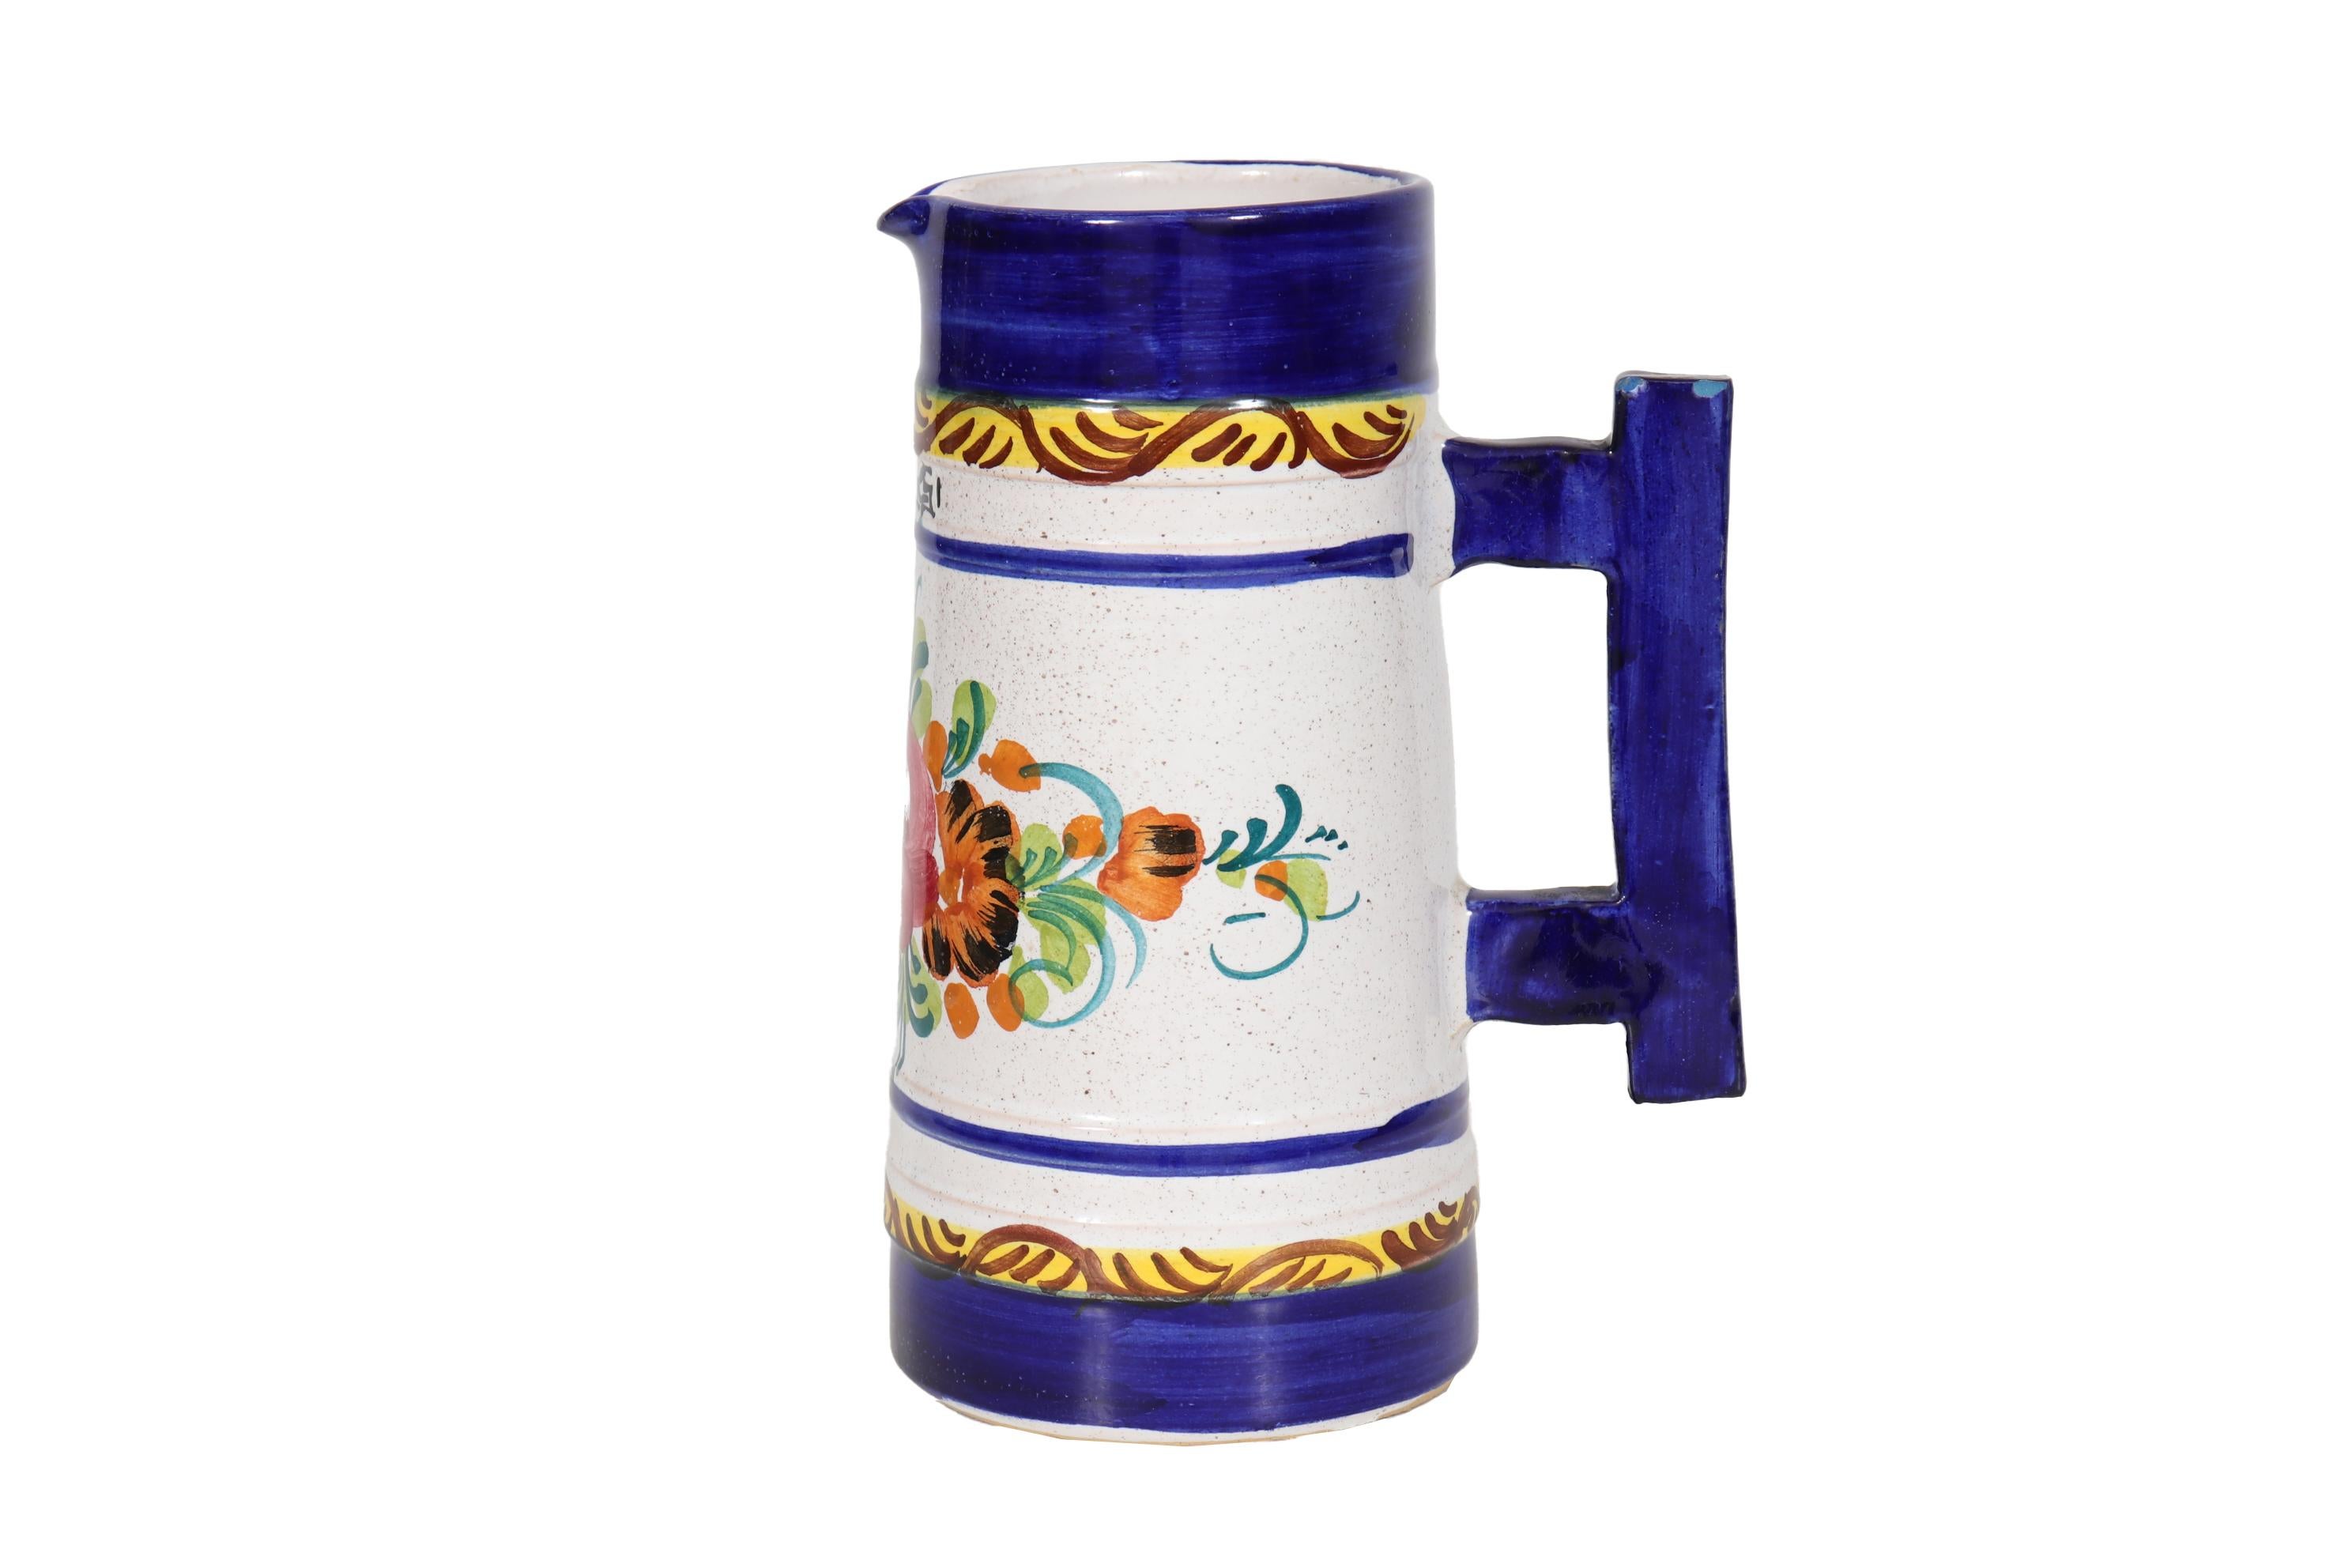 An Italian ceramic pitcher. Hand painted with a colorful floral spray on a white background, framed in rich cobalt blue. In the front it’s signed “Fiuggi”, an Italian province. In the back is a squared handle.